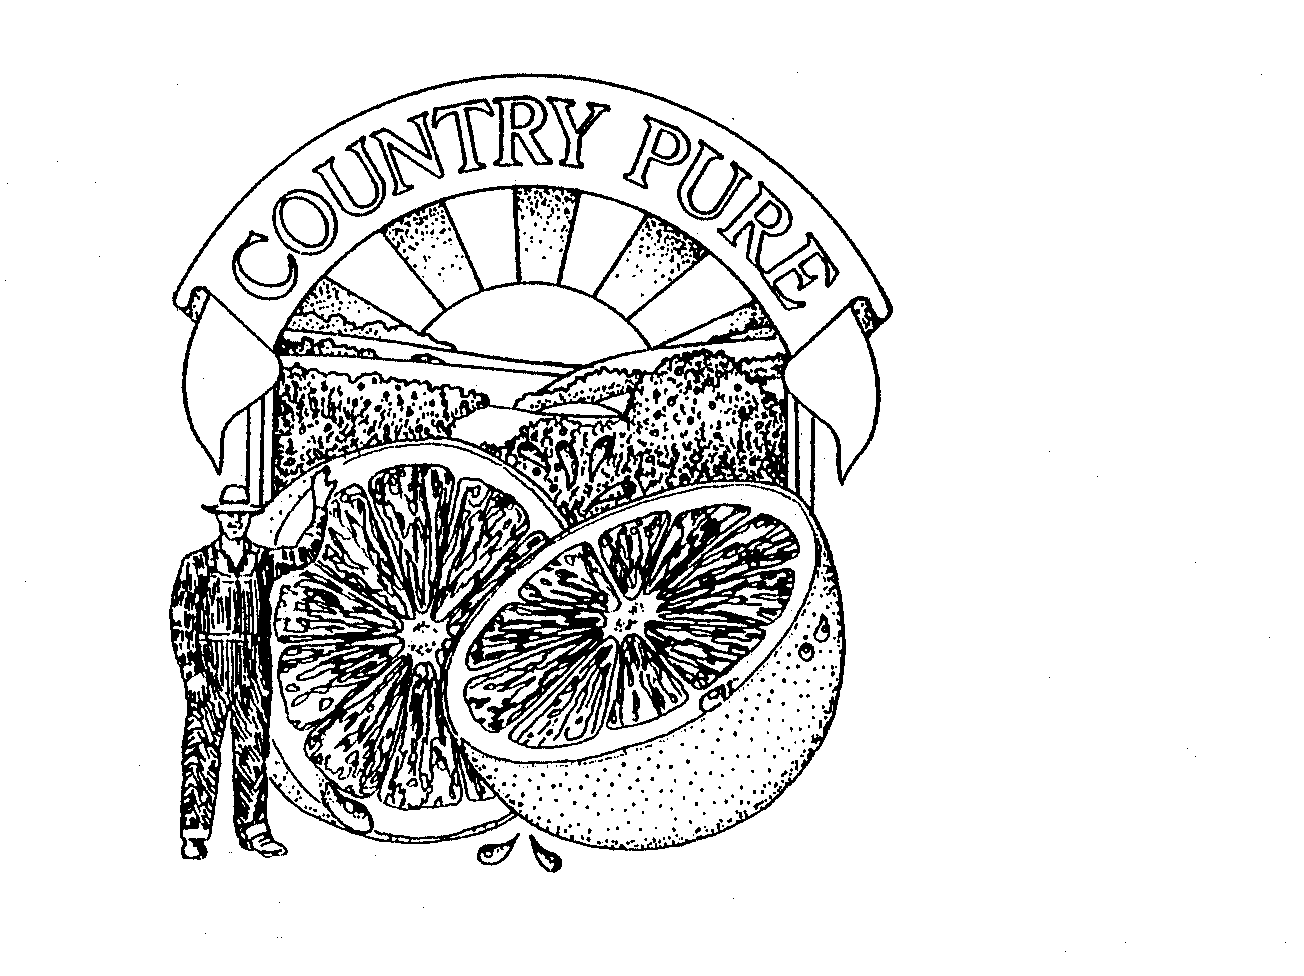 COUNTRY PURE